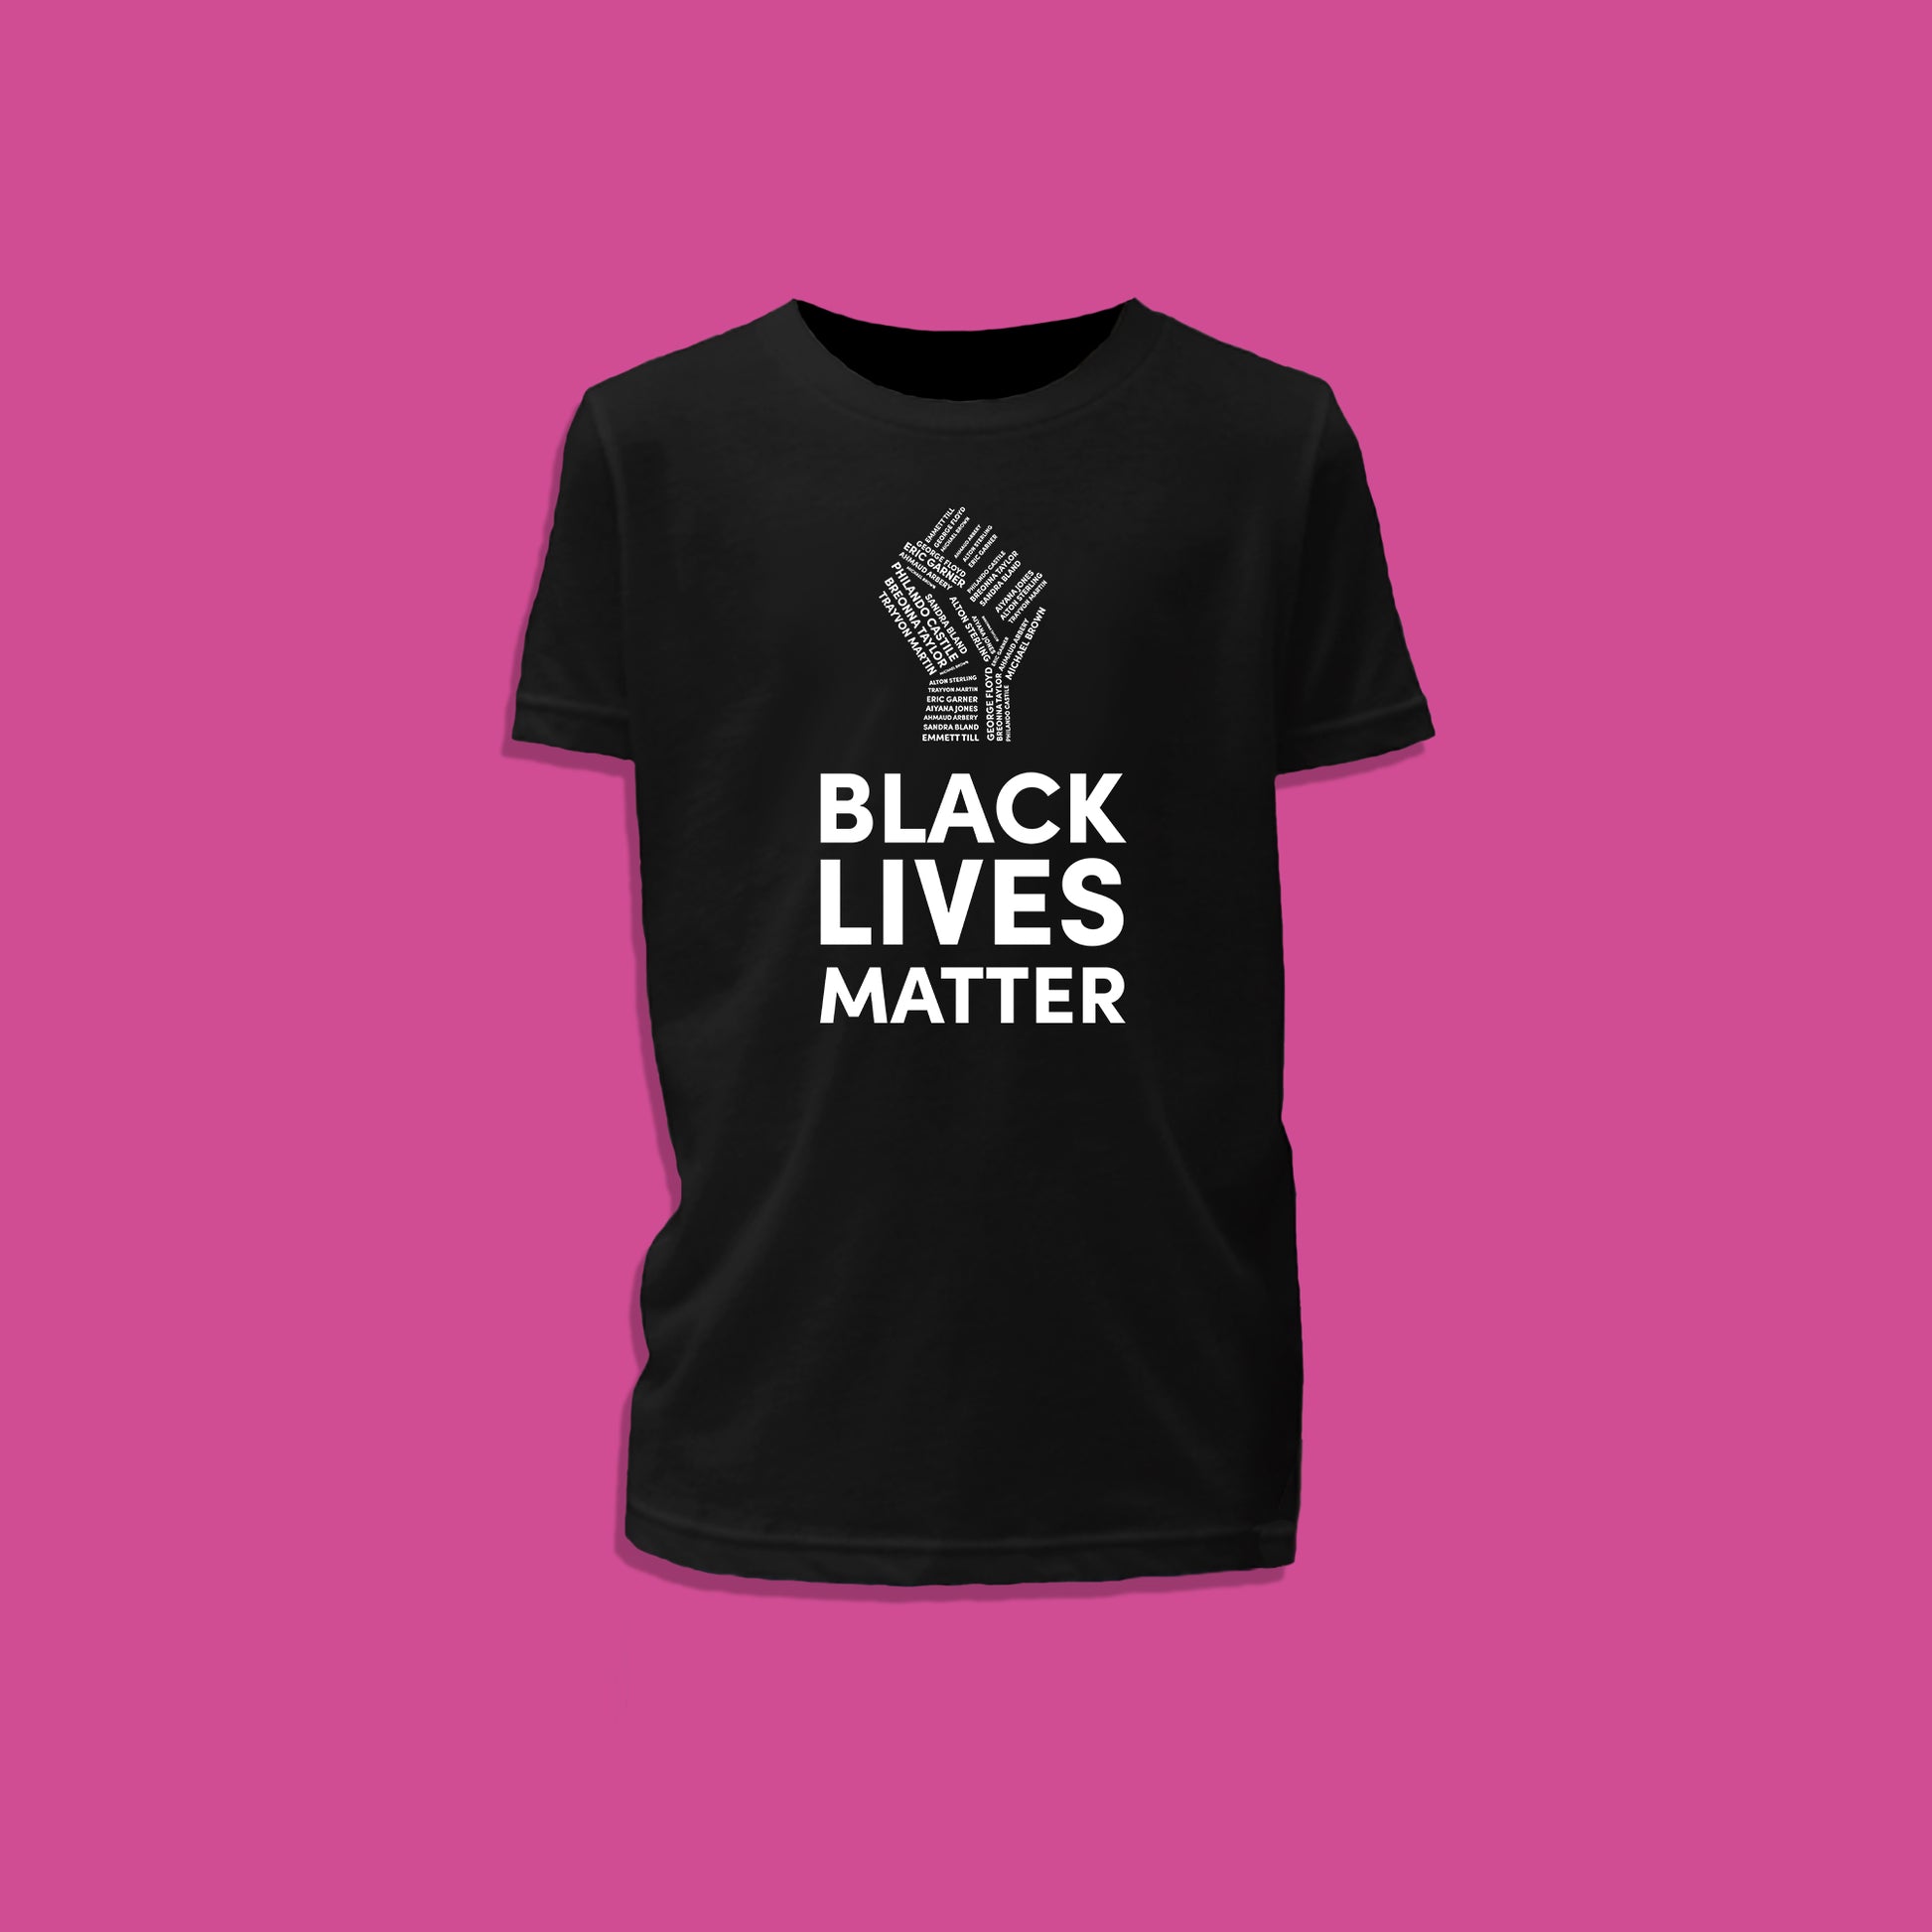 Kid's black cotton t-shirt with black lives matter and a fist printed in white on the front